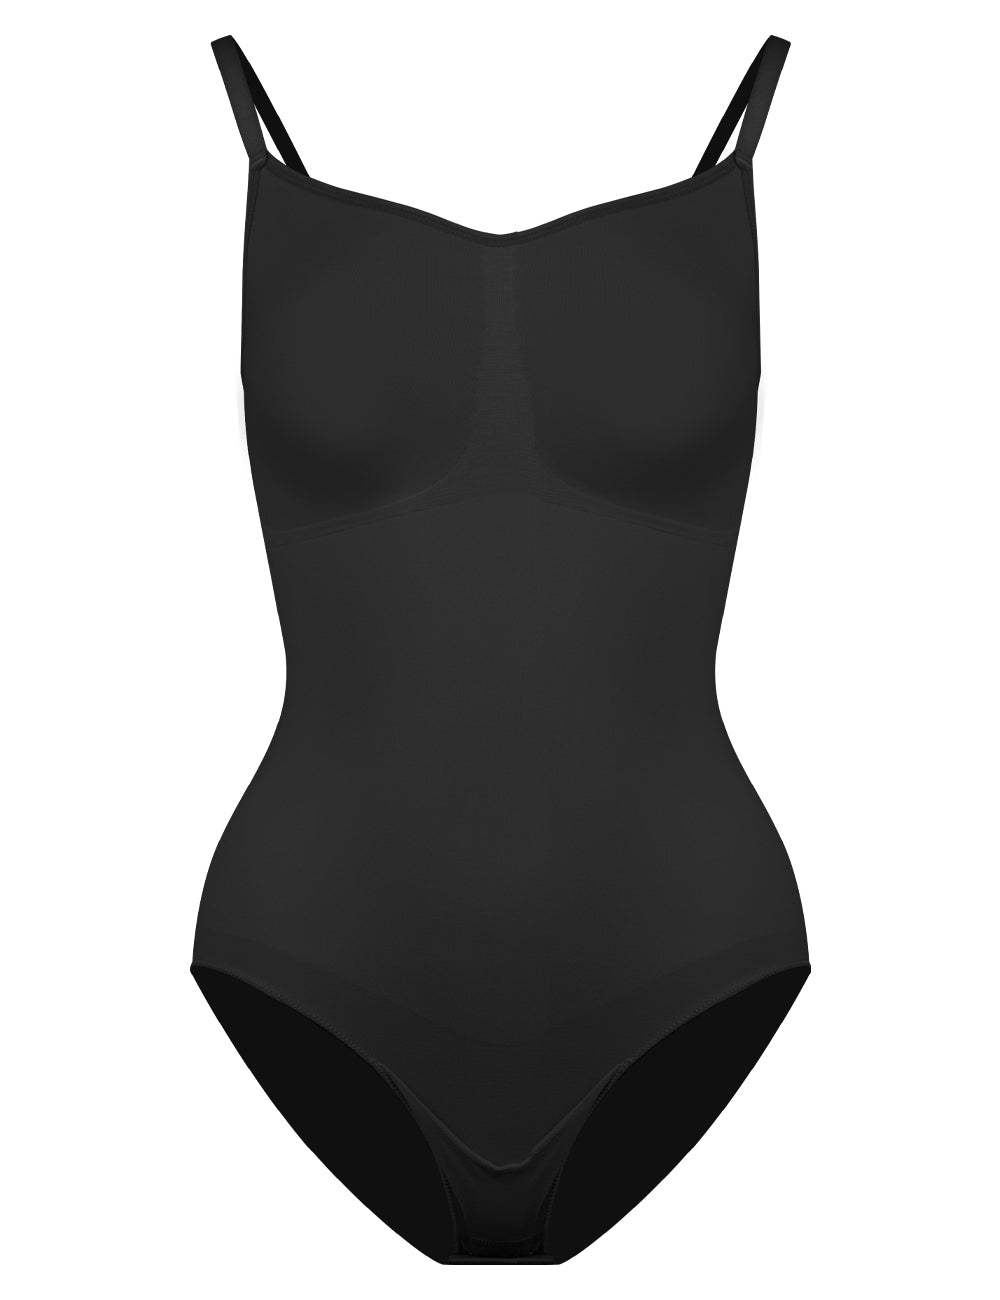 niidor-Black Seamless Barely There Brief Bodysuit seamless shapewear